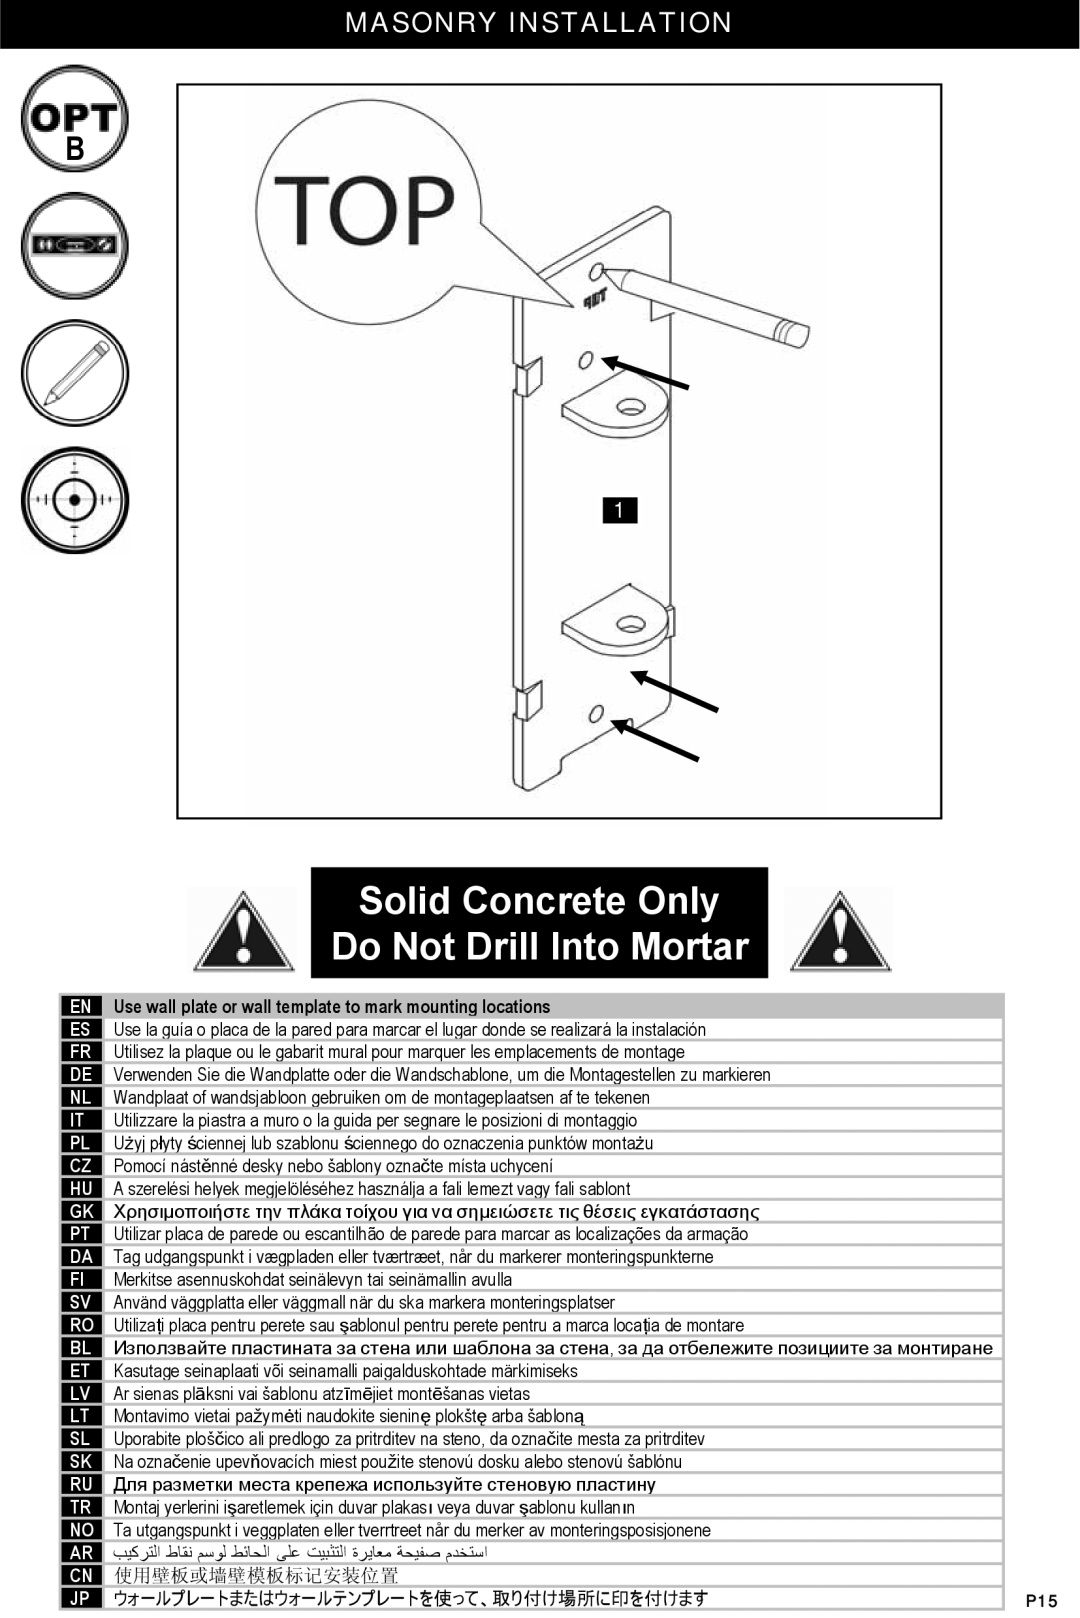 Omnimount ECS, OM10103 instruction manual Masonry Installation, Solid Concrete Only, Do Not Drill Into Mortar 